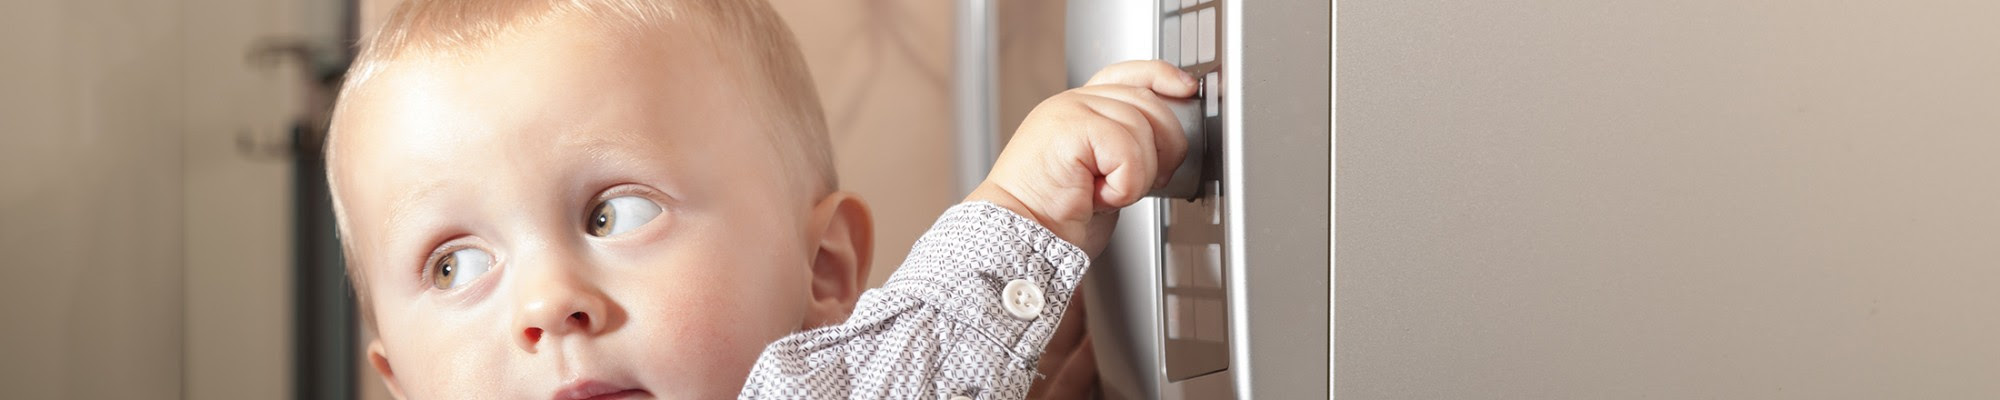 Expertise.com – Baby Proofing